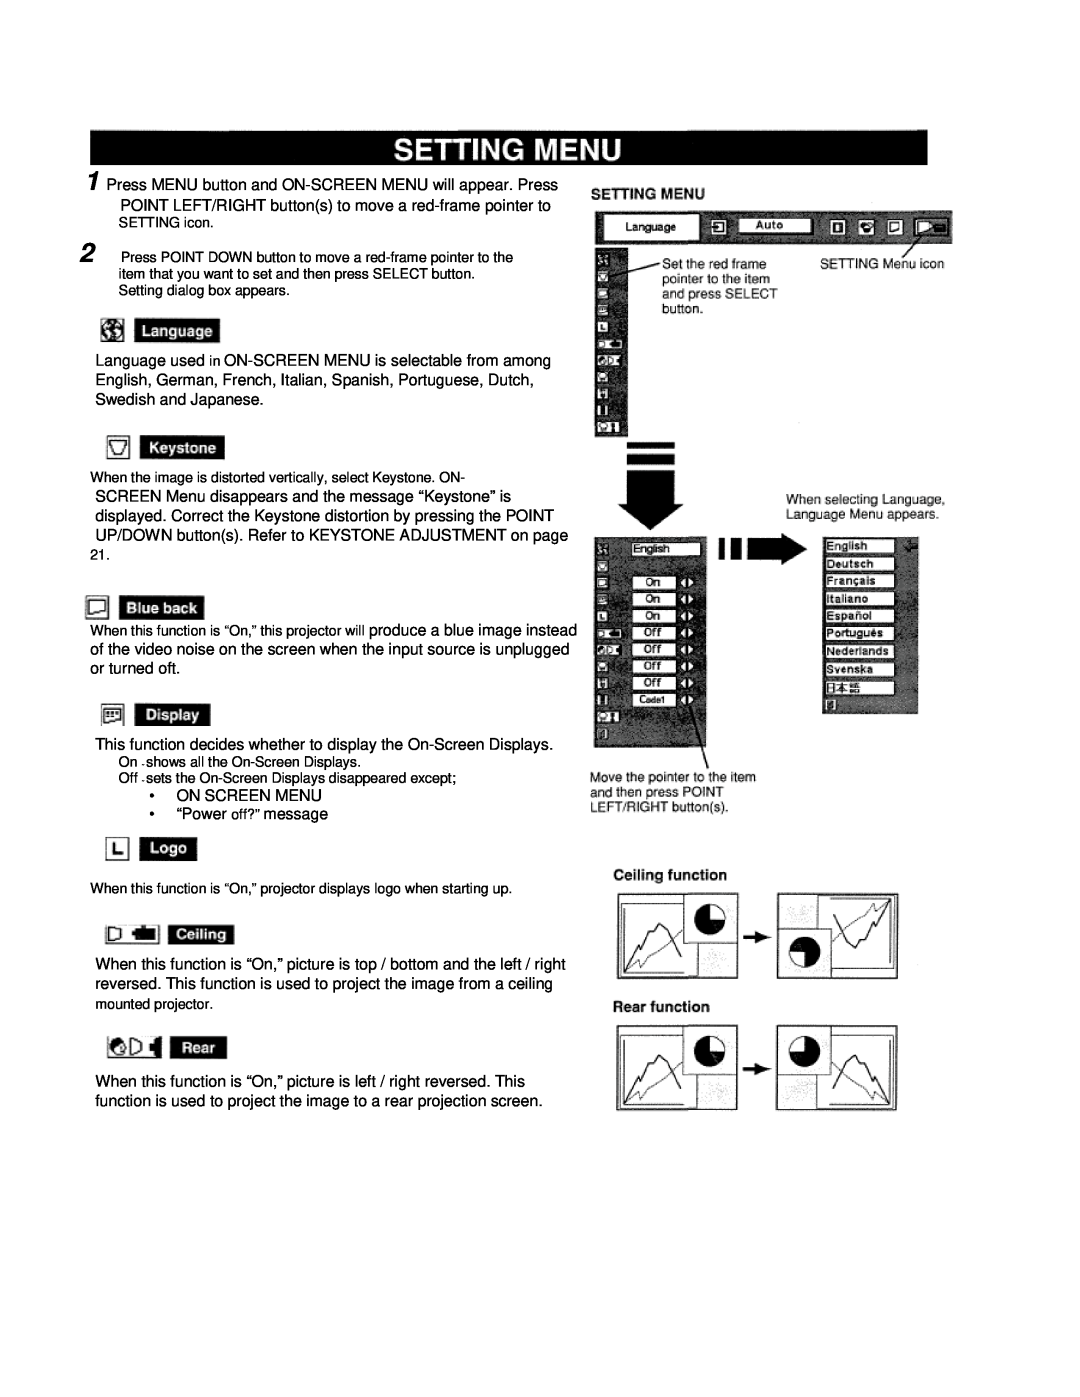 Eiki LC-VC1 owner manual This function decides whether to display the On-Screen Displays 